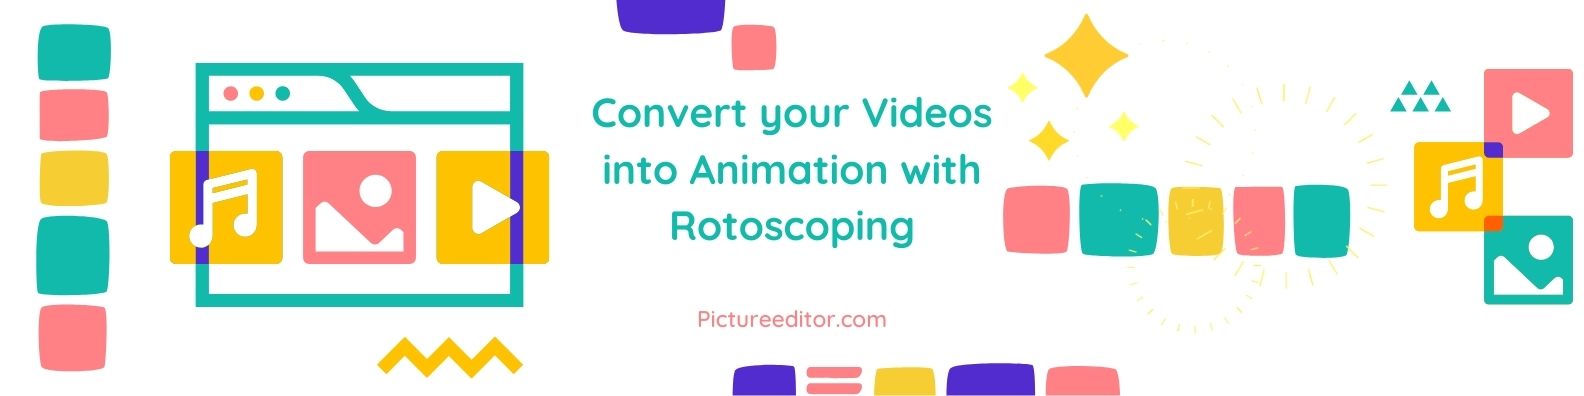 Convert your Videos into Animation with Rotoscoping